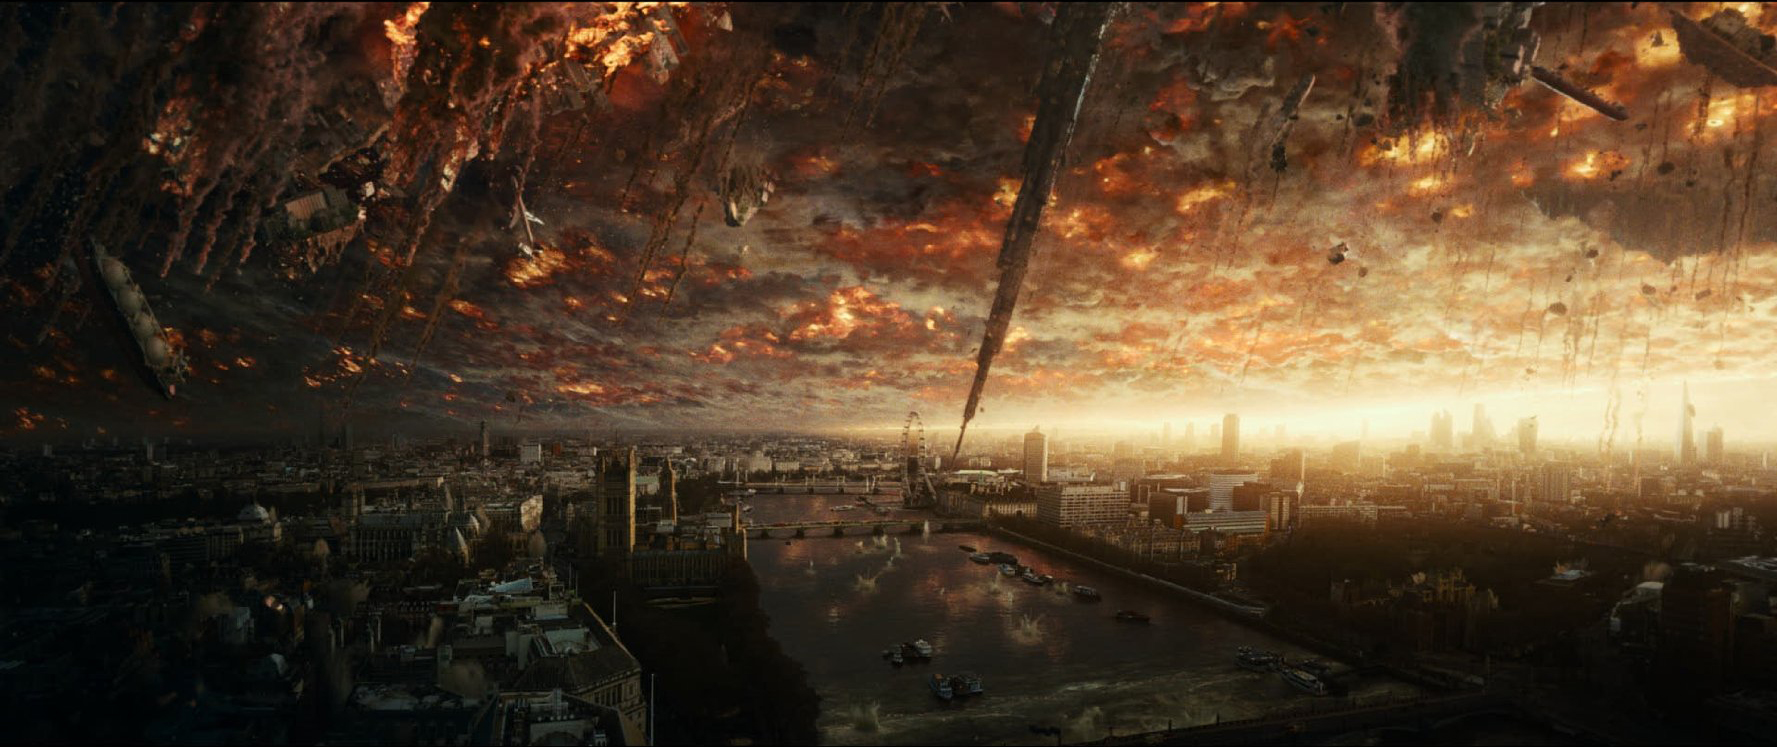 possible sequel to independence day resurgence